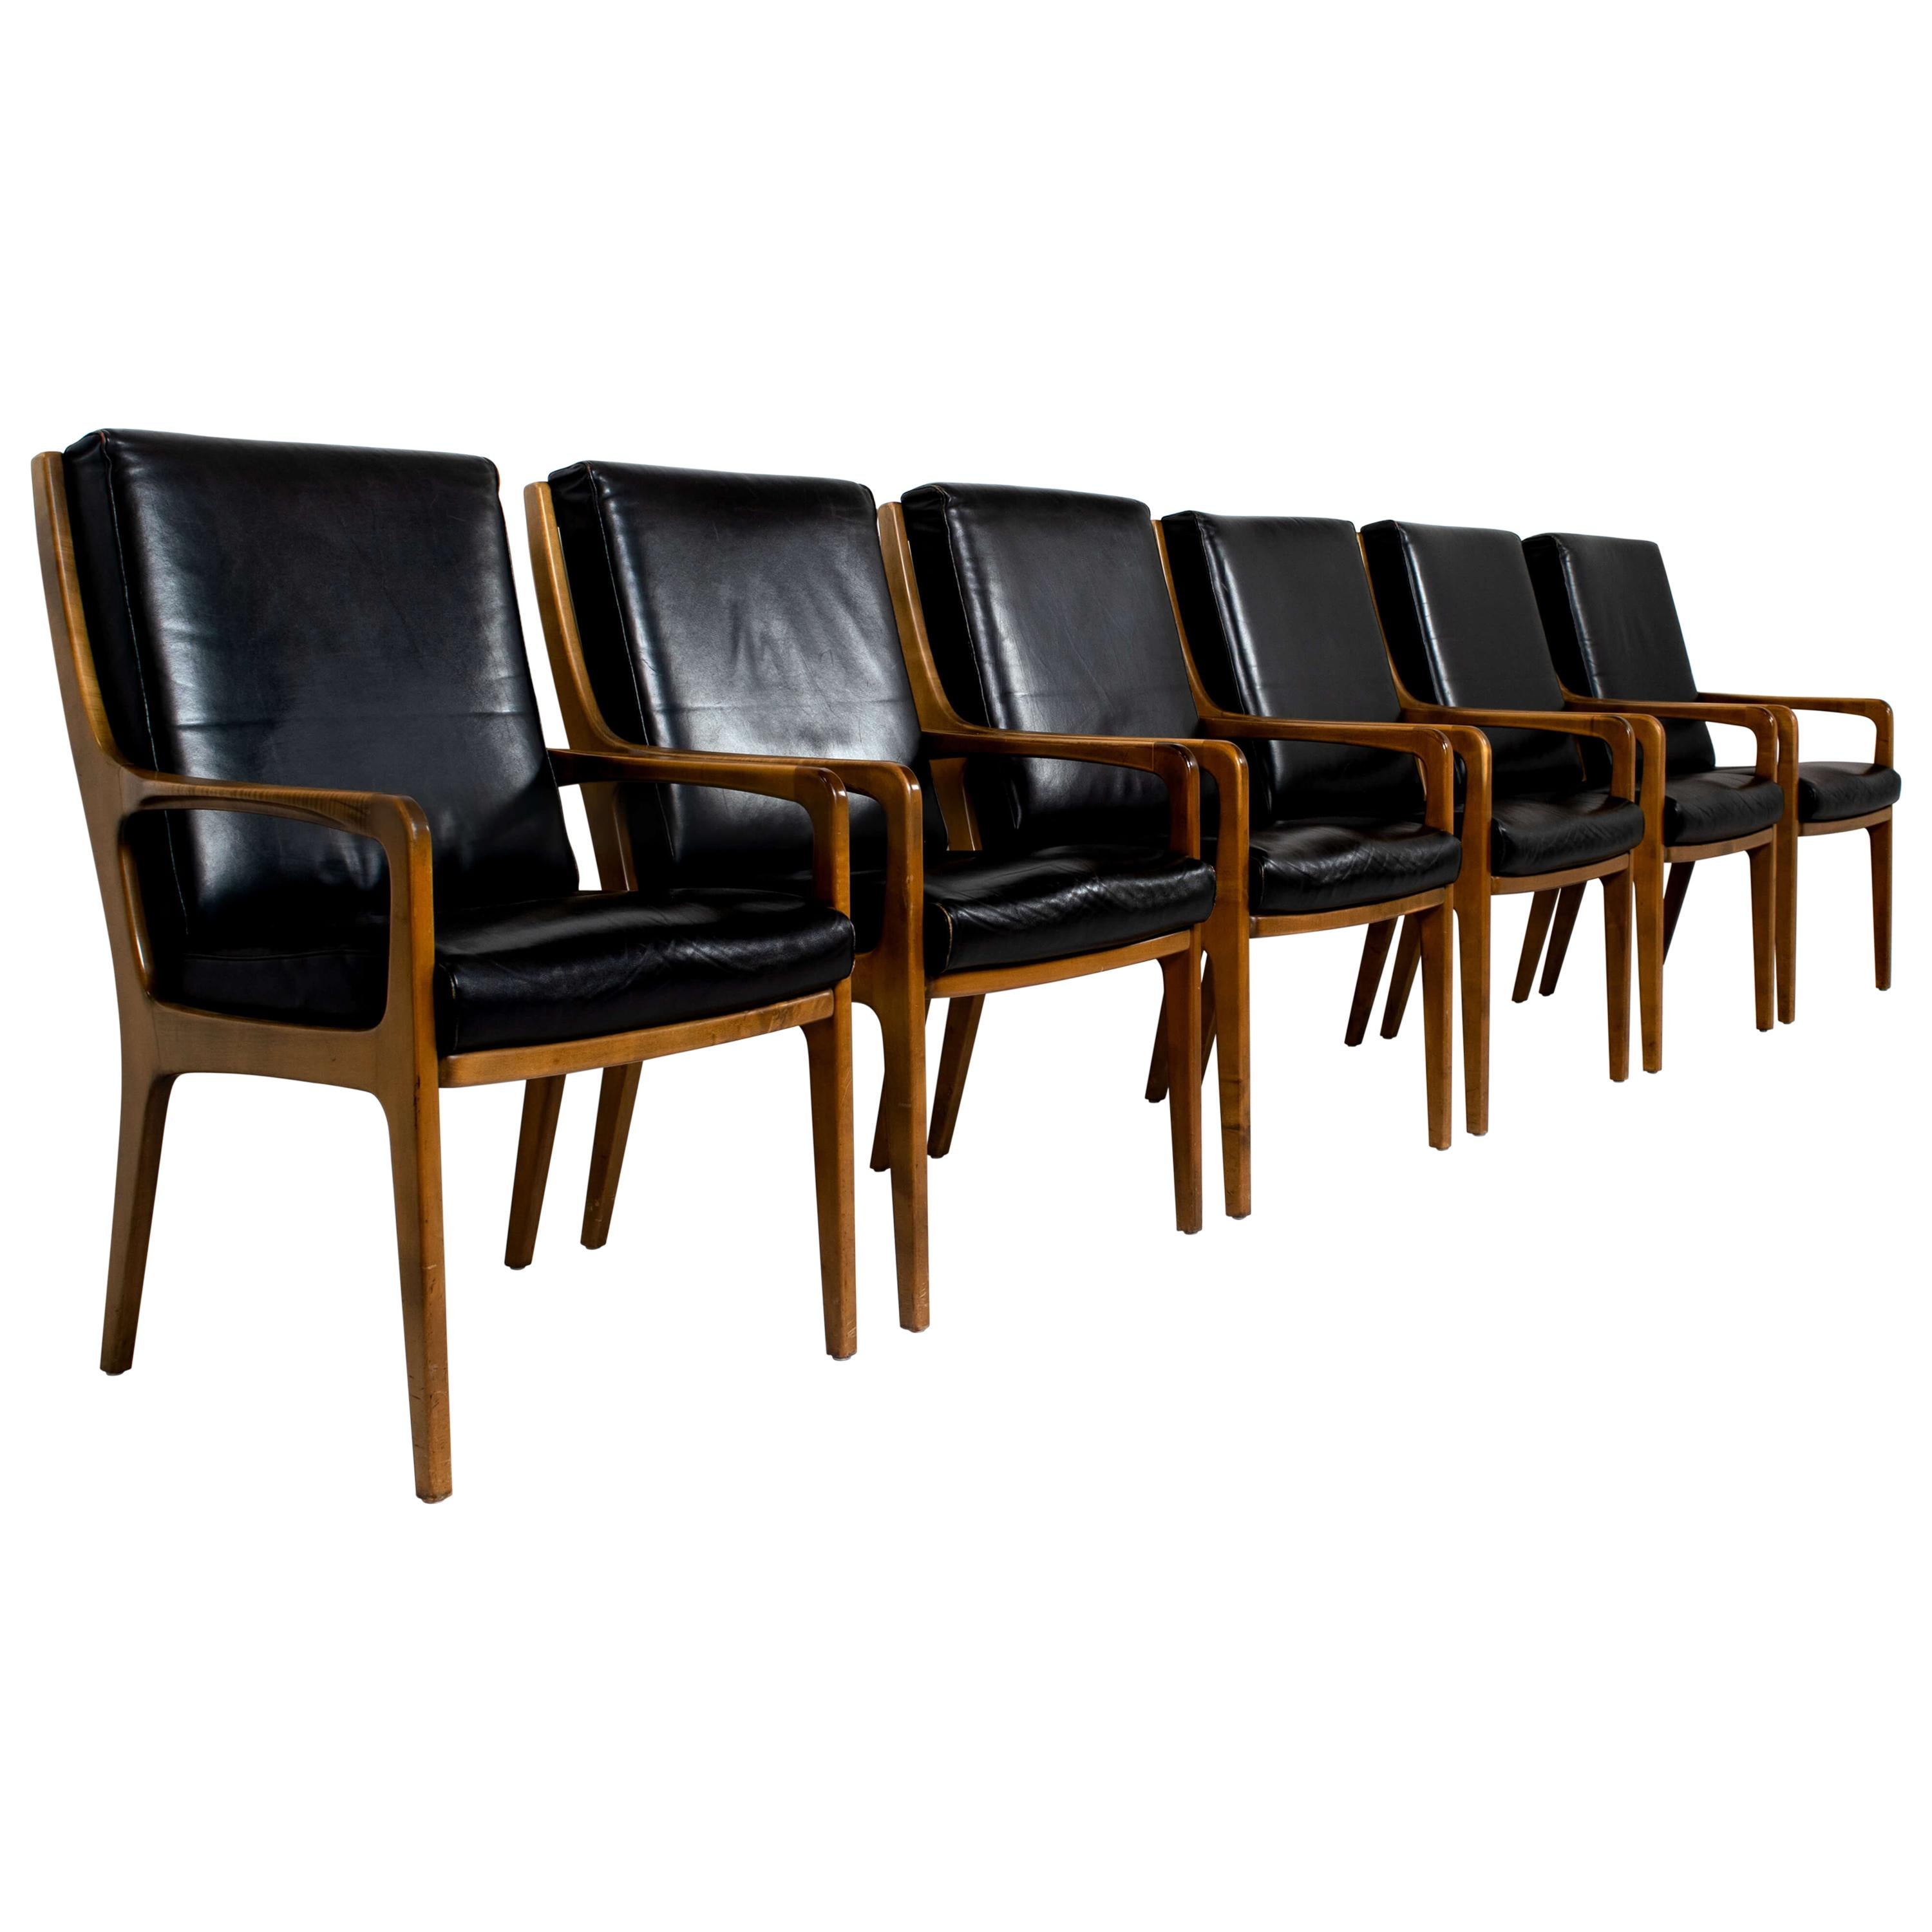 Six Eugen Schmidt High-Back Conference Chairs in Leather and Wood